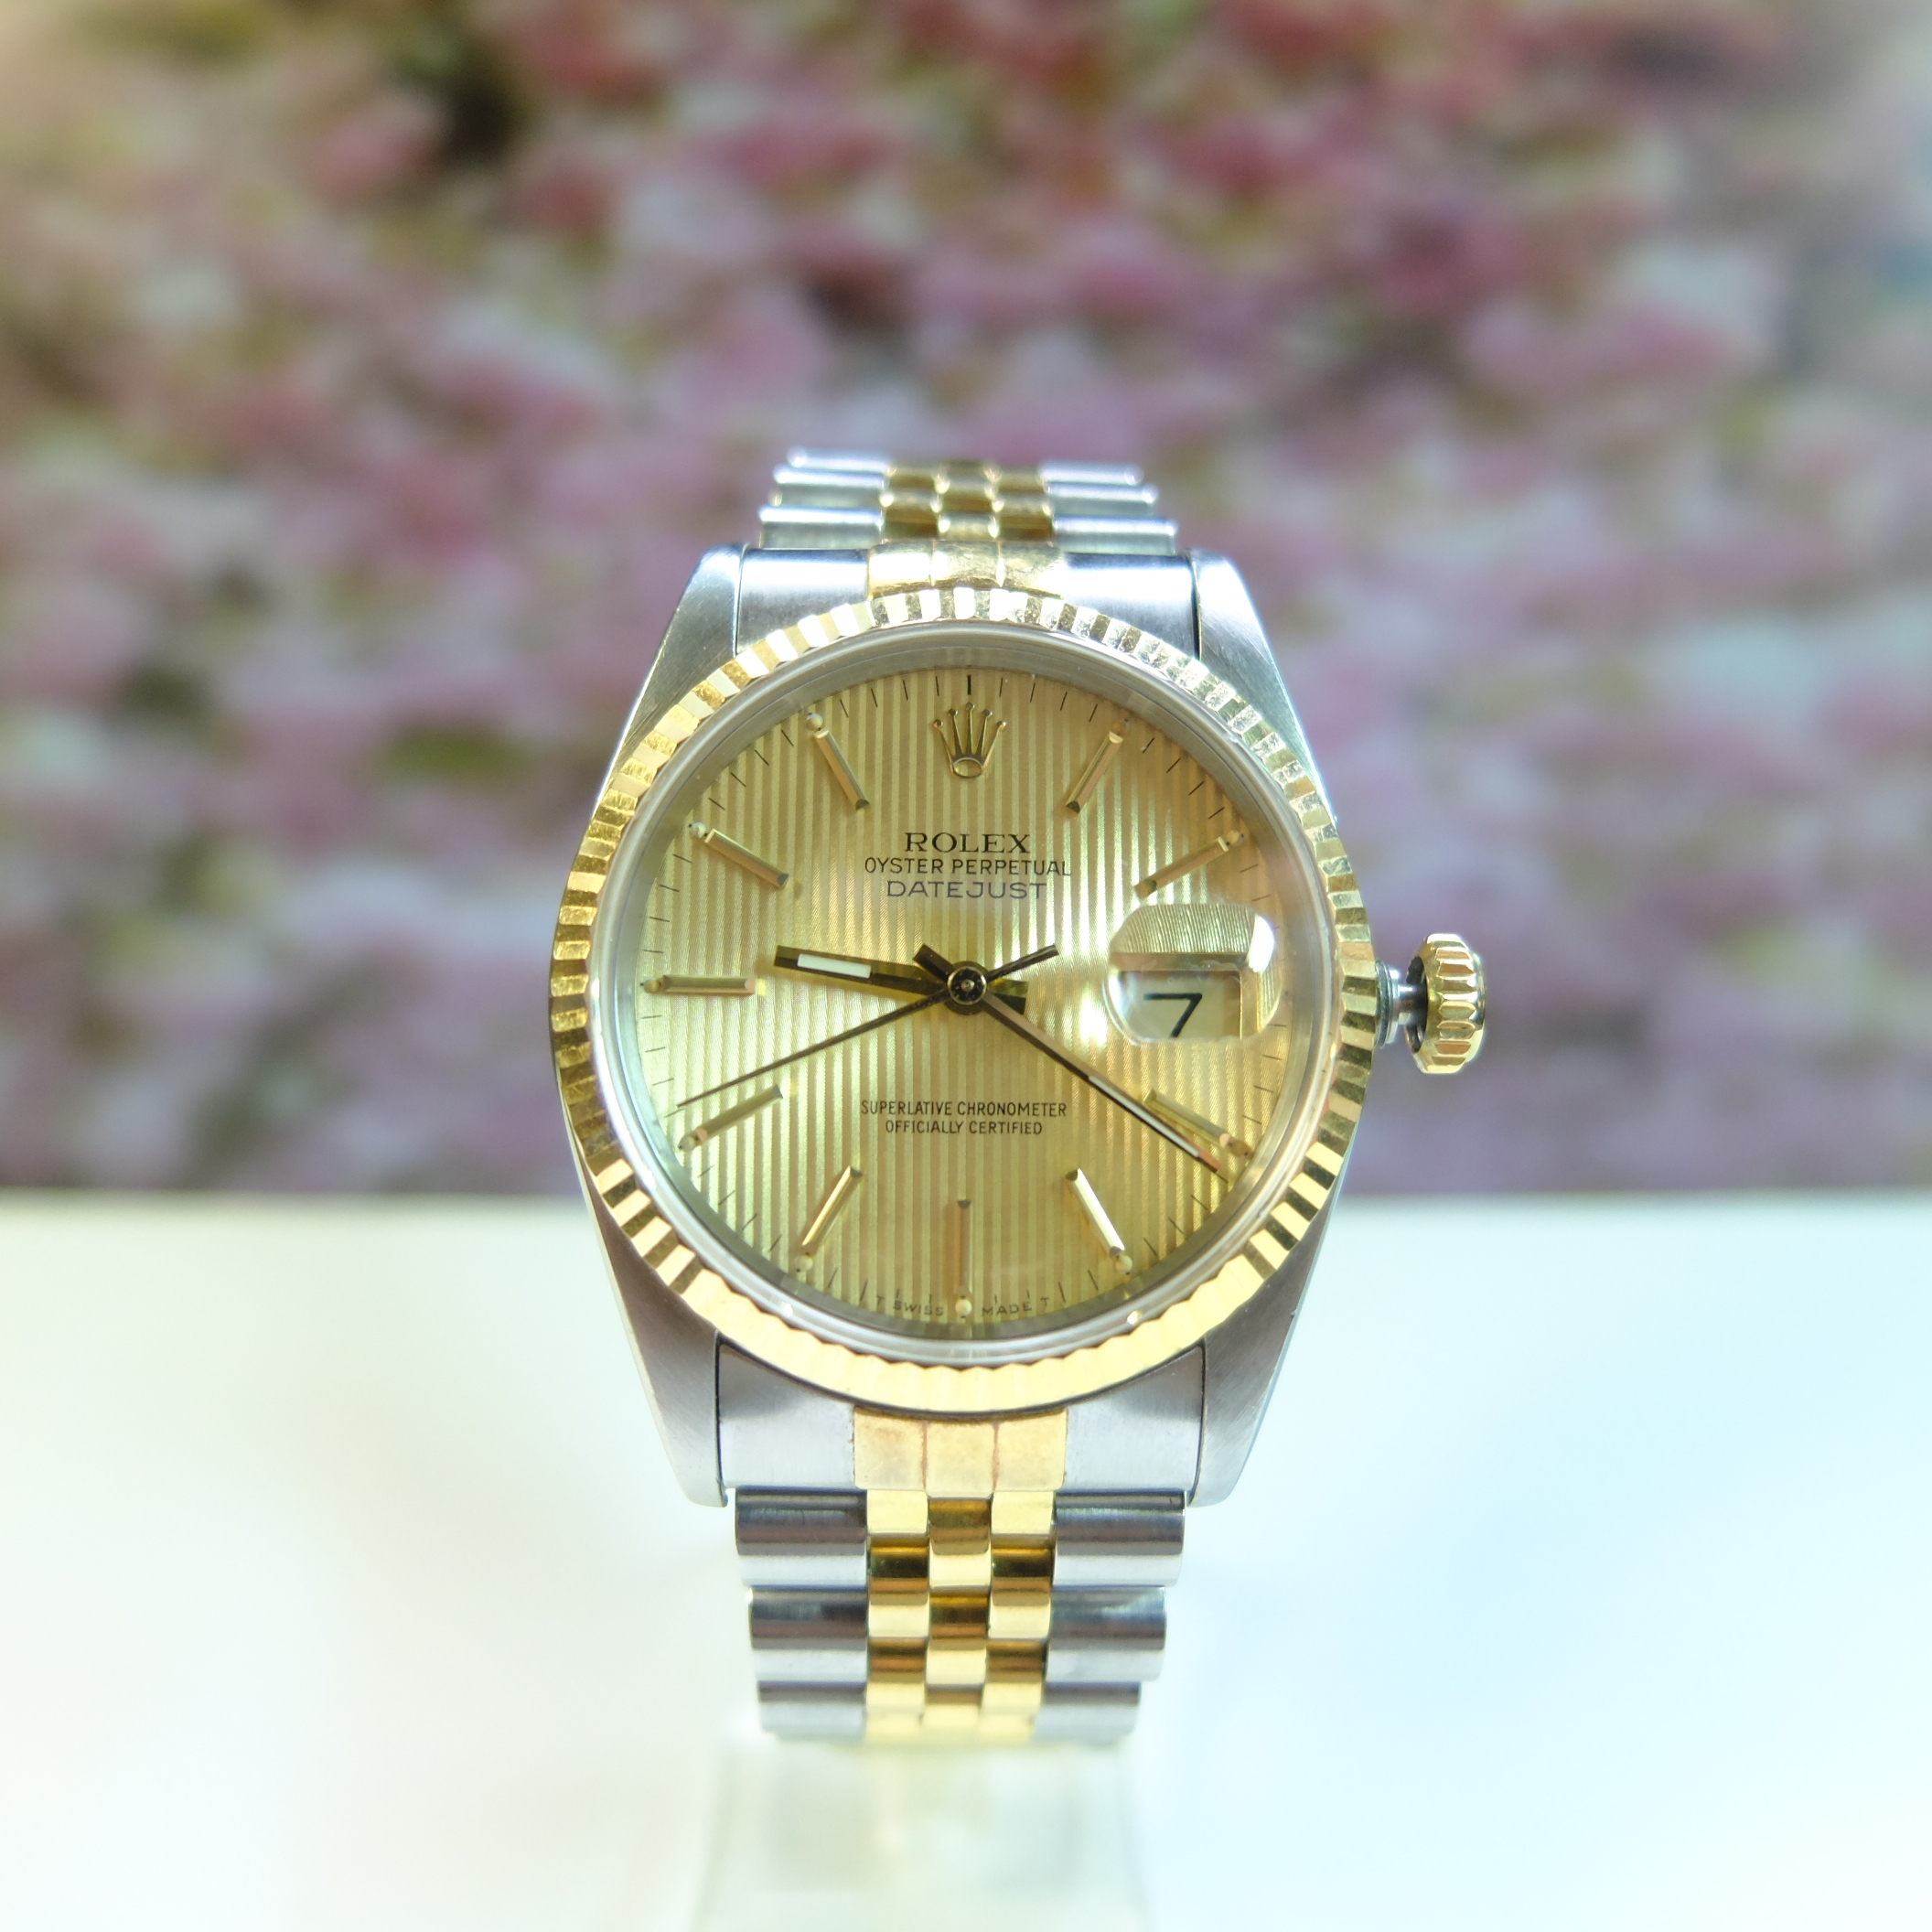 rolex oyster perpetual datejust superlative chronometer officially certified 16233